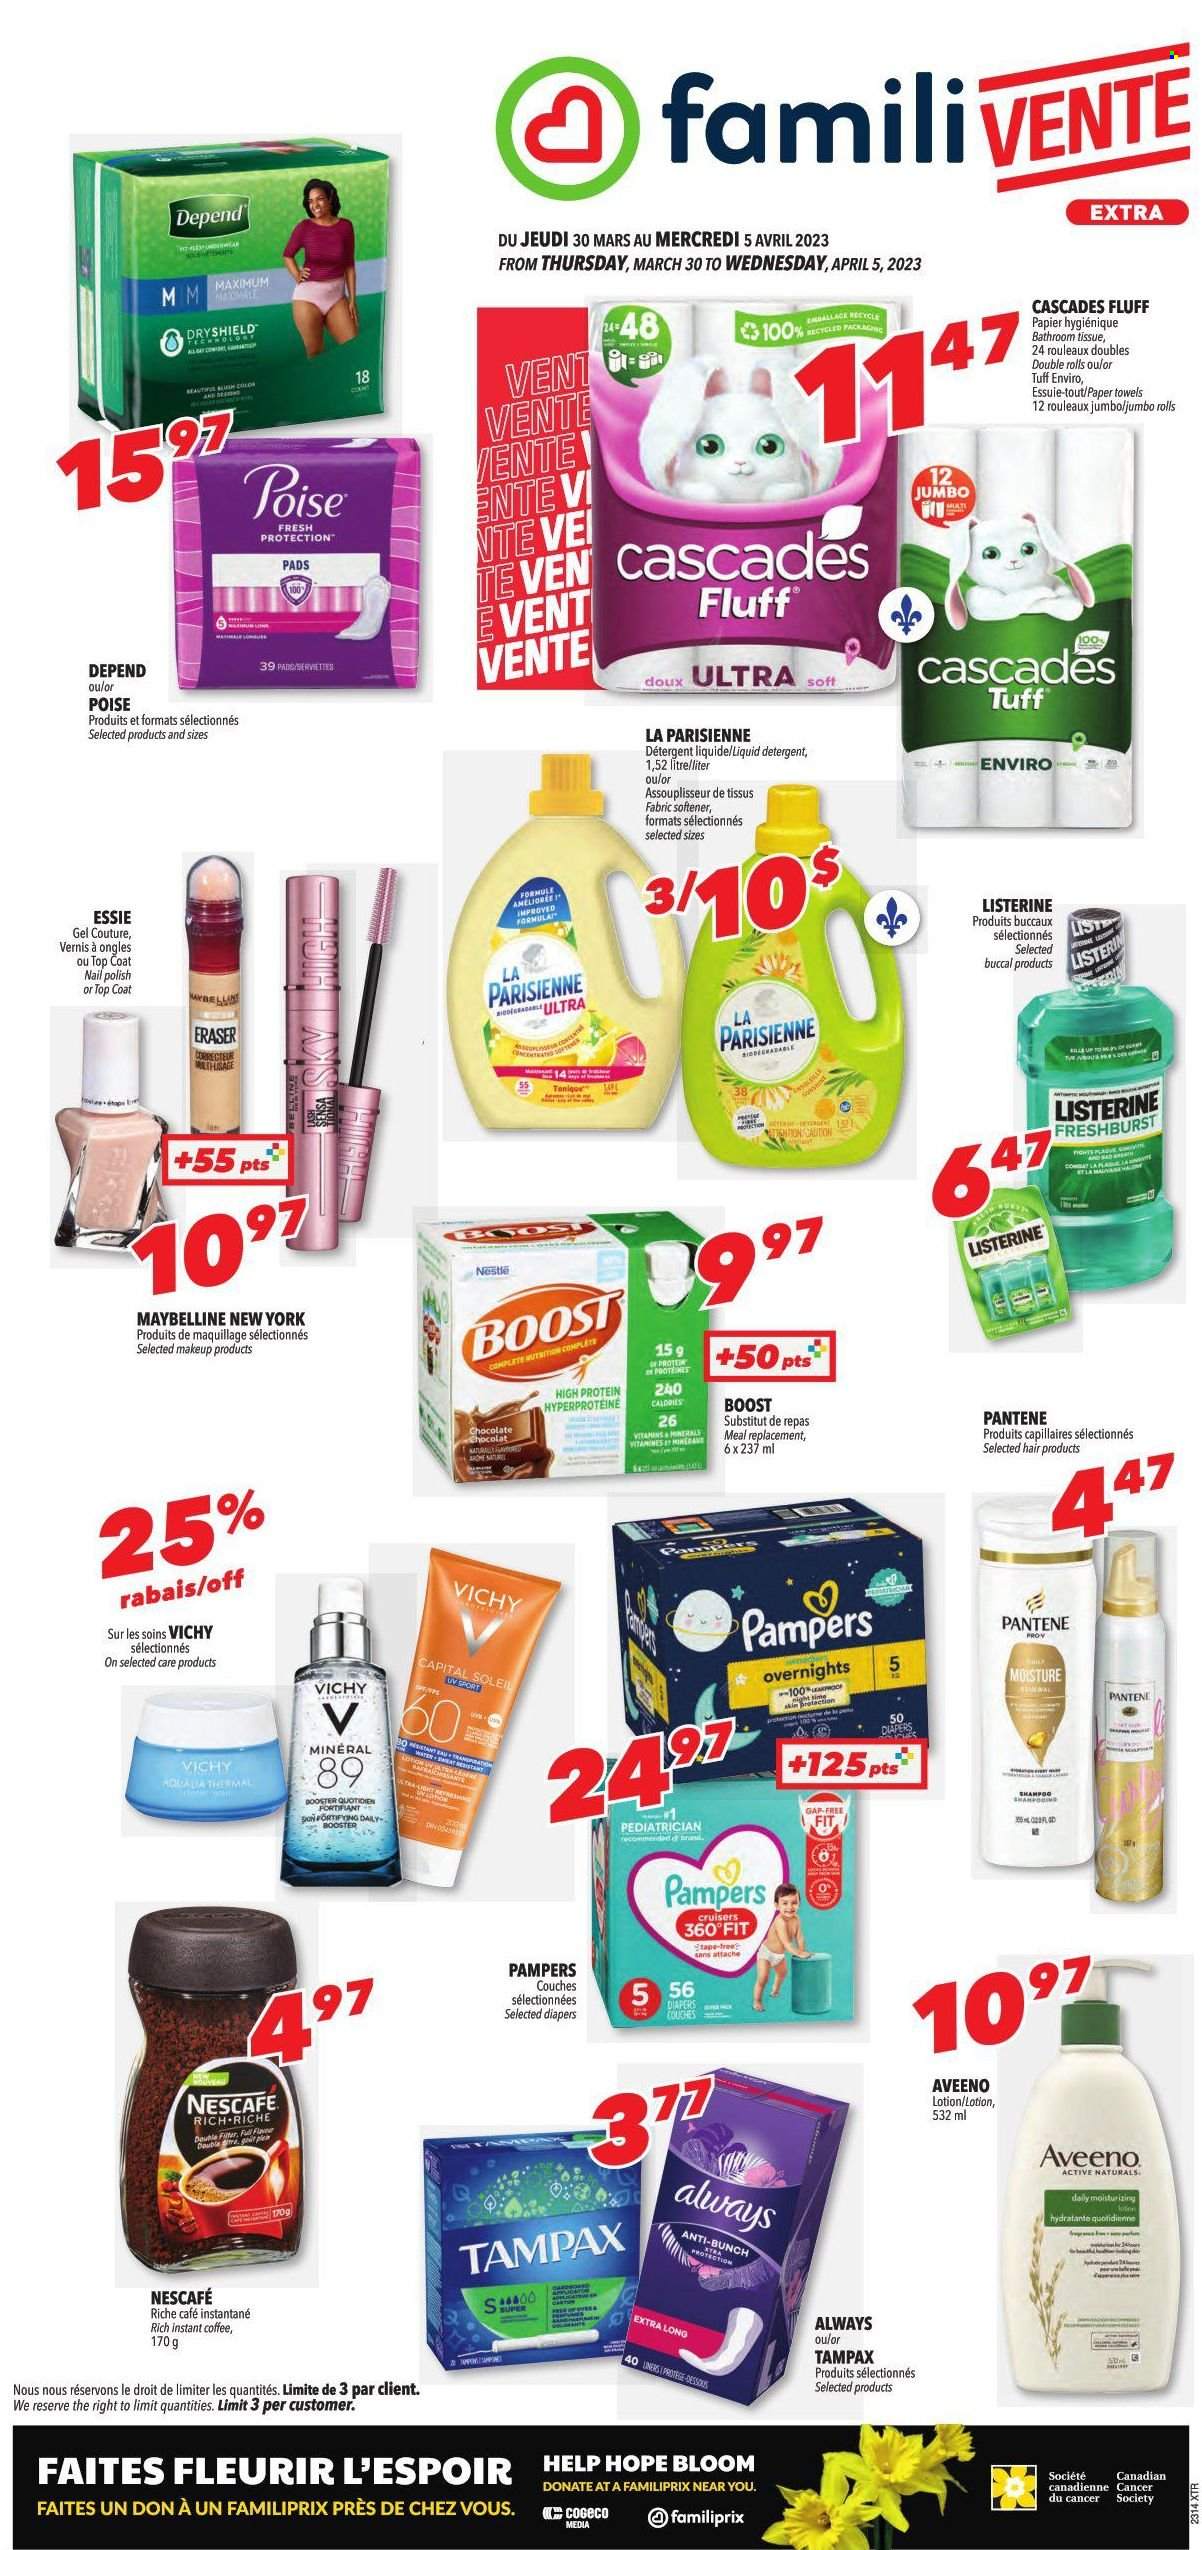 thumbnail - Familiprix Extra Flyer - March 30, 2023 - April 05, 2023 - Sales products - chocolate, Mars, water, Boost, coffee, instant coffee, Pampers, nappies, Aveeno, bath tissue, kitchen towels, paper towels, fabric softener, liquid detergent, Vichy, hair products, Pantene, body lotion, top coat, polish, makeup, Maybelline, detergent, Listerine, Nestlé, shampoo, Tampax, Nescafé. Page 1.